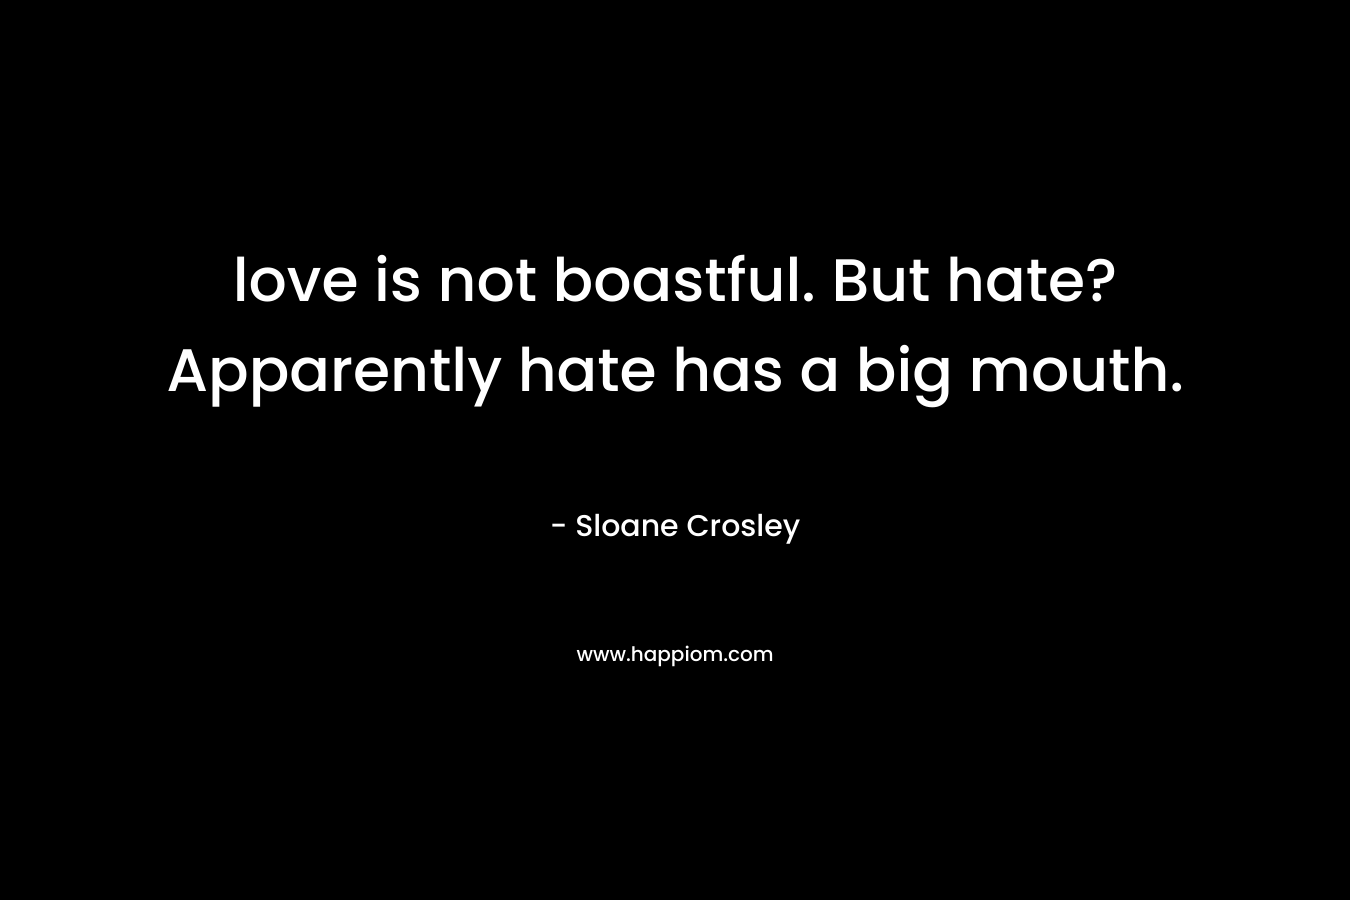 love is not boastful. But hate? Apparently hate has a big mouth.